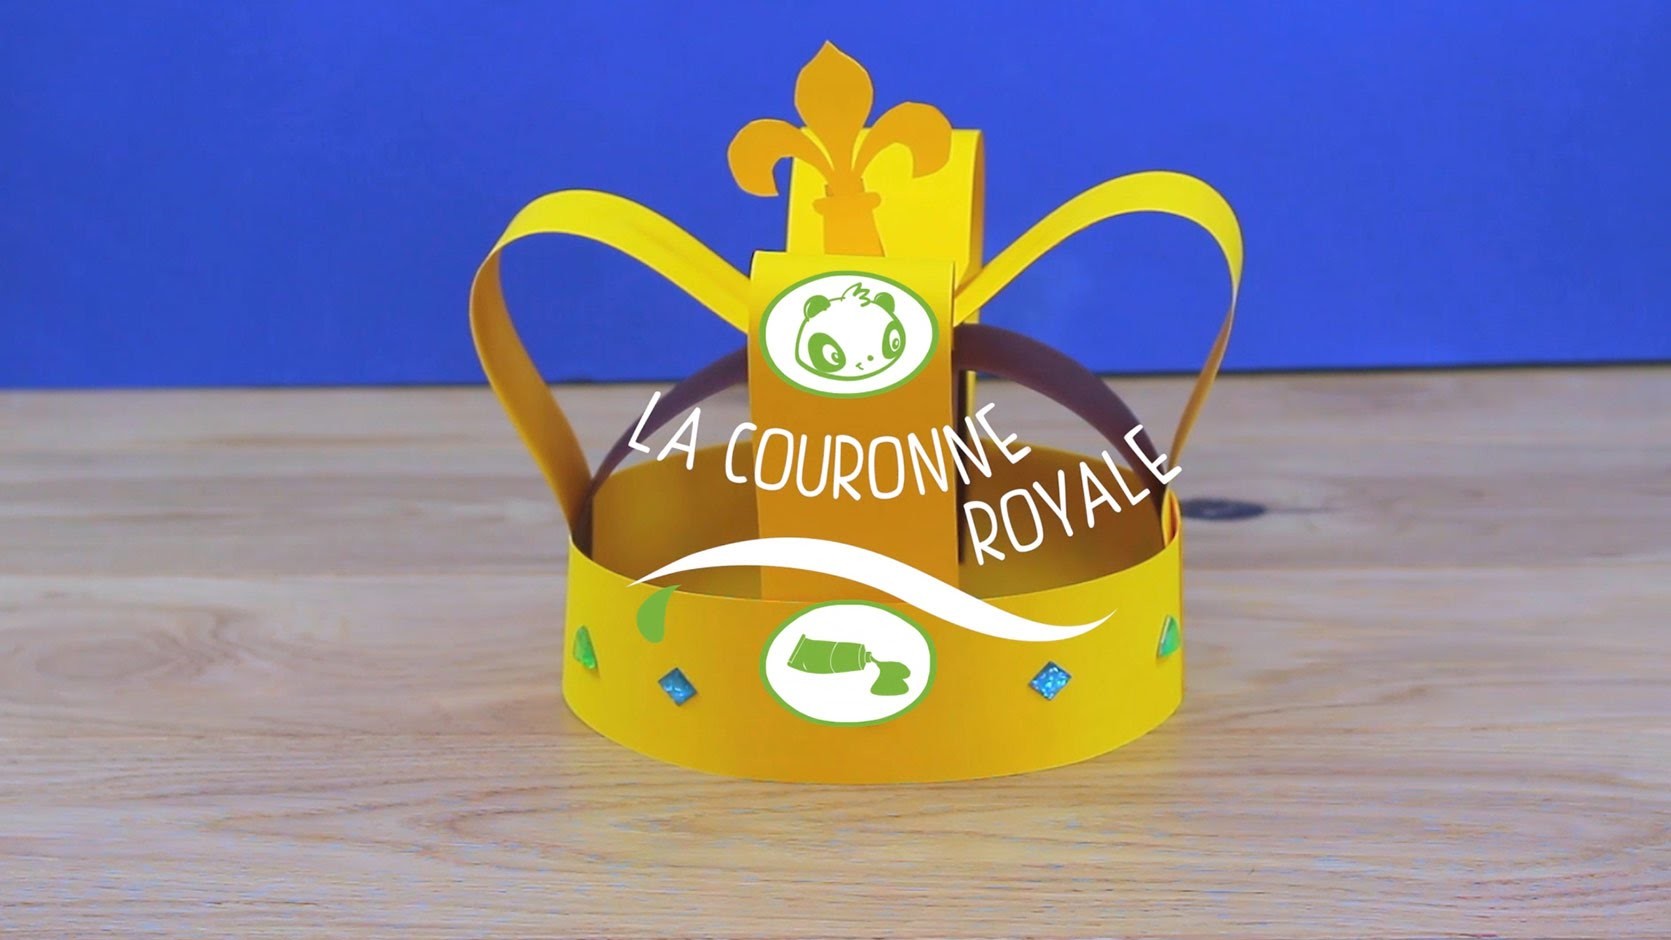 The Daily Craft : la couronne royale